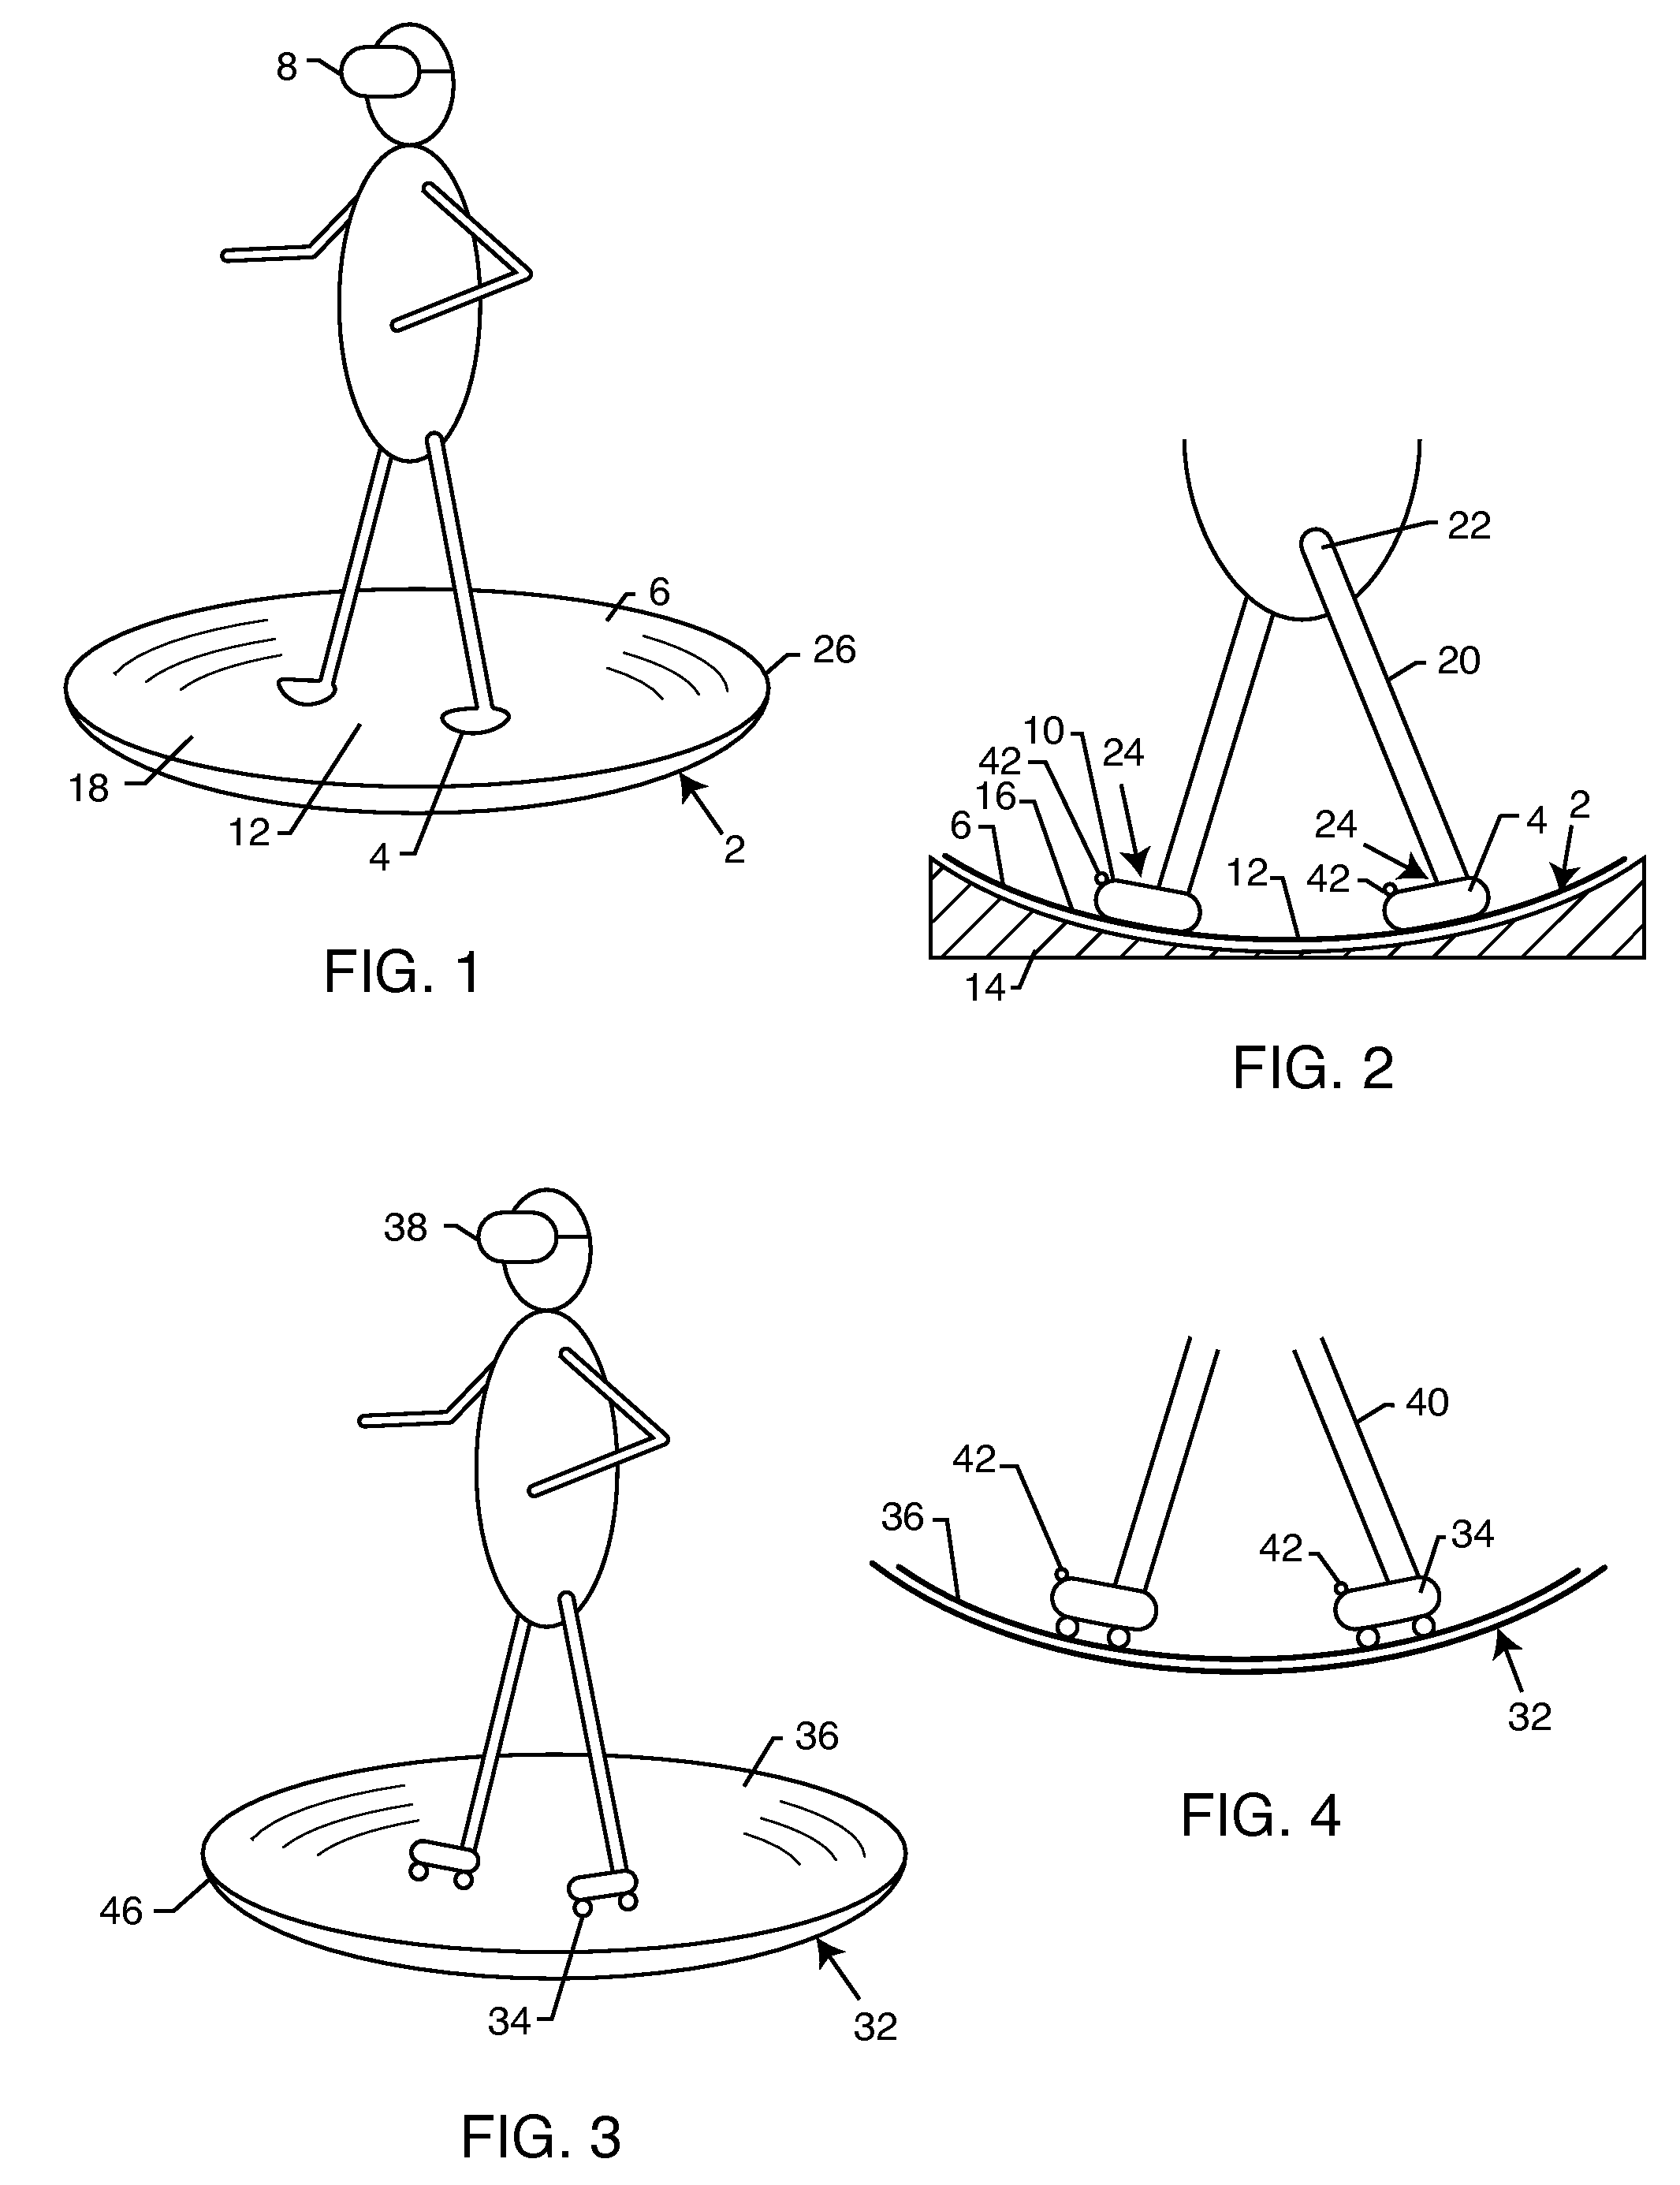 Walk simulation apparatus for exercise and virtual reality